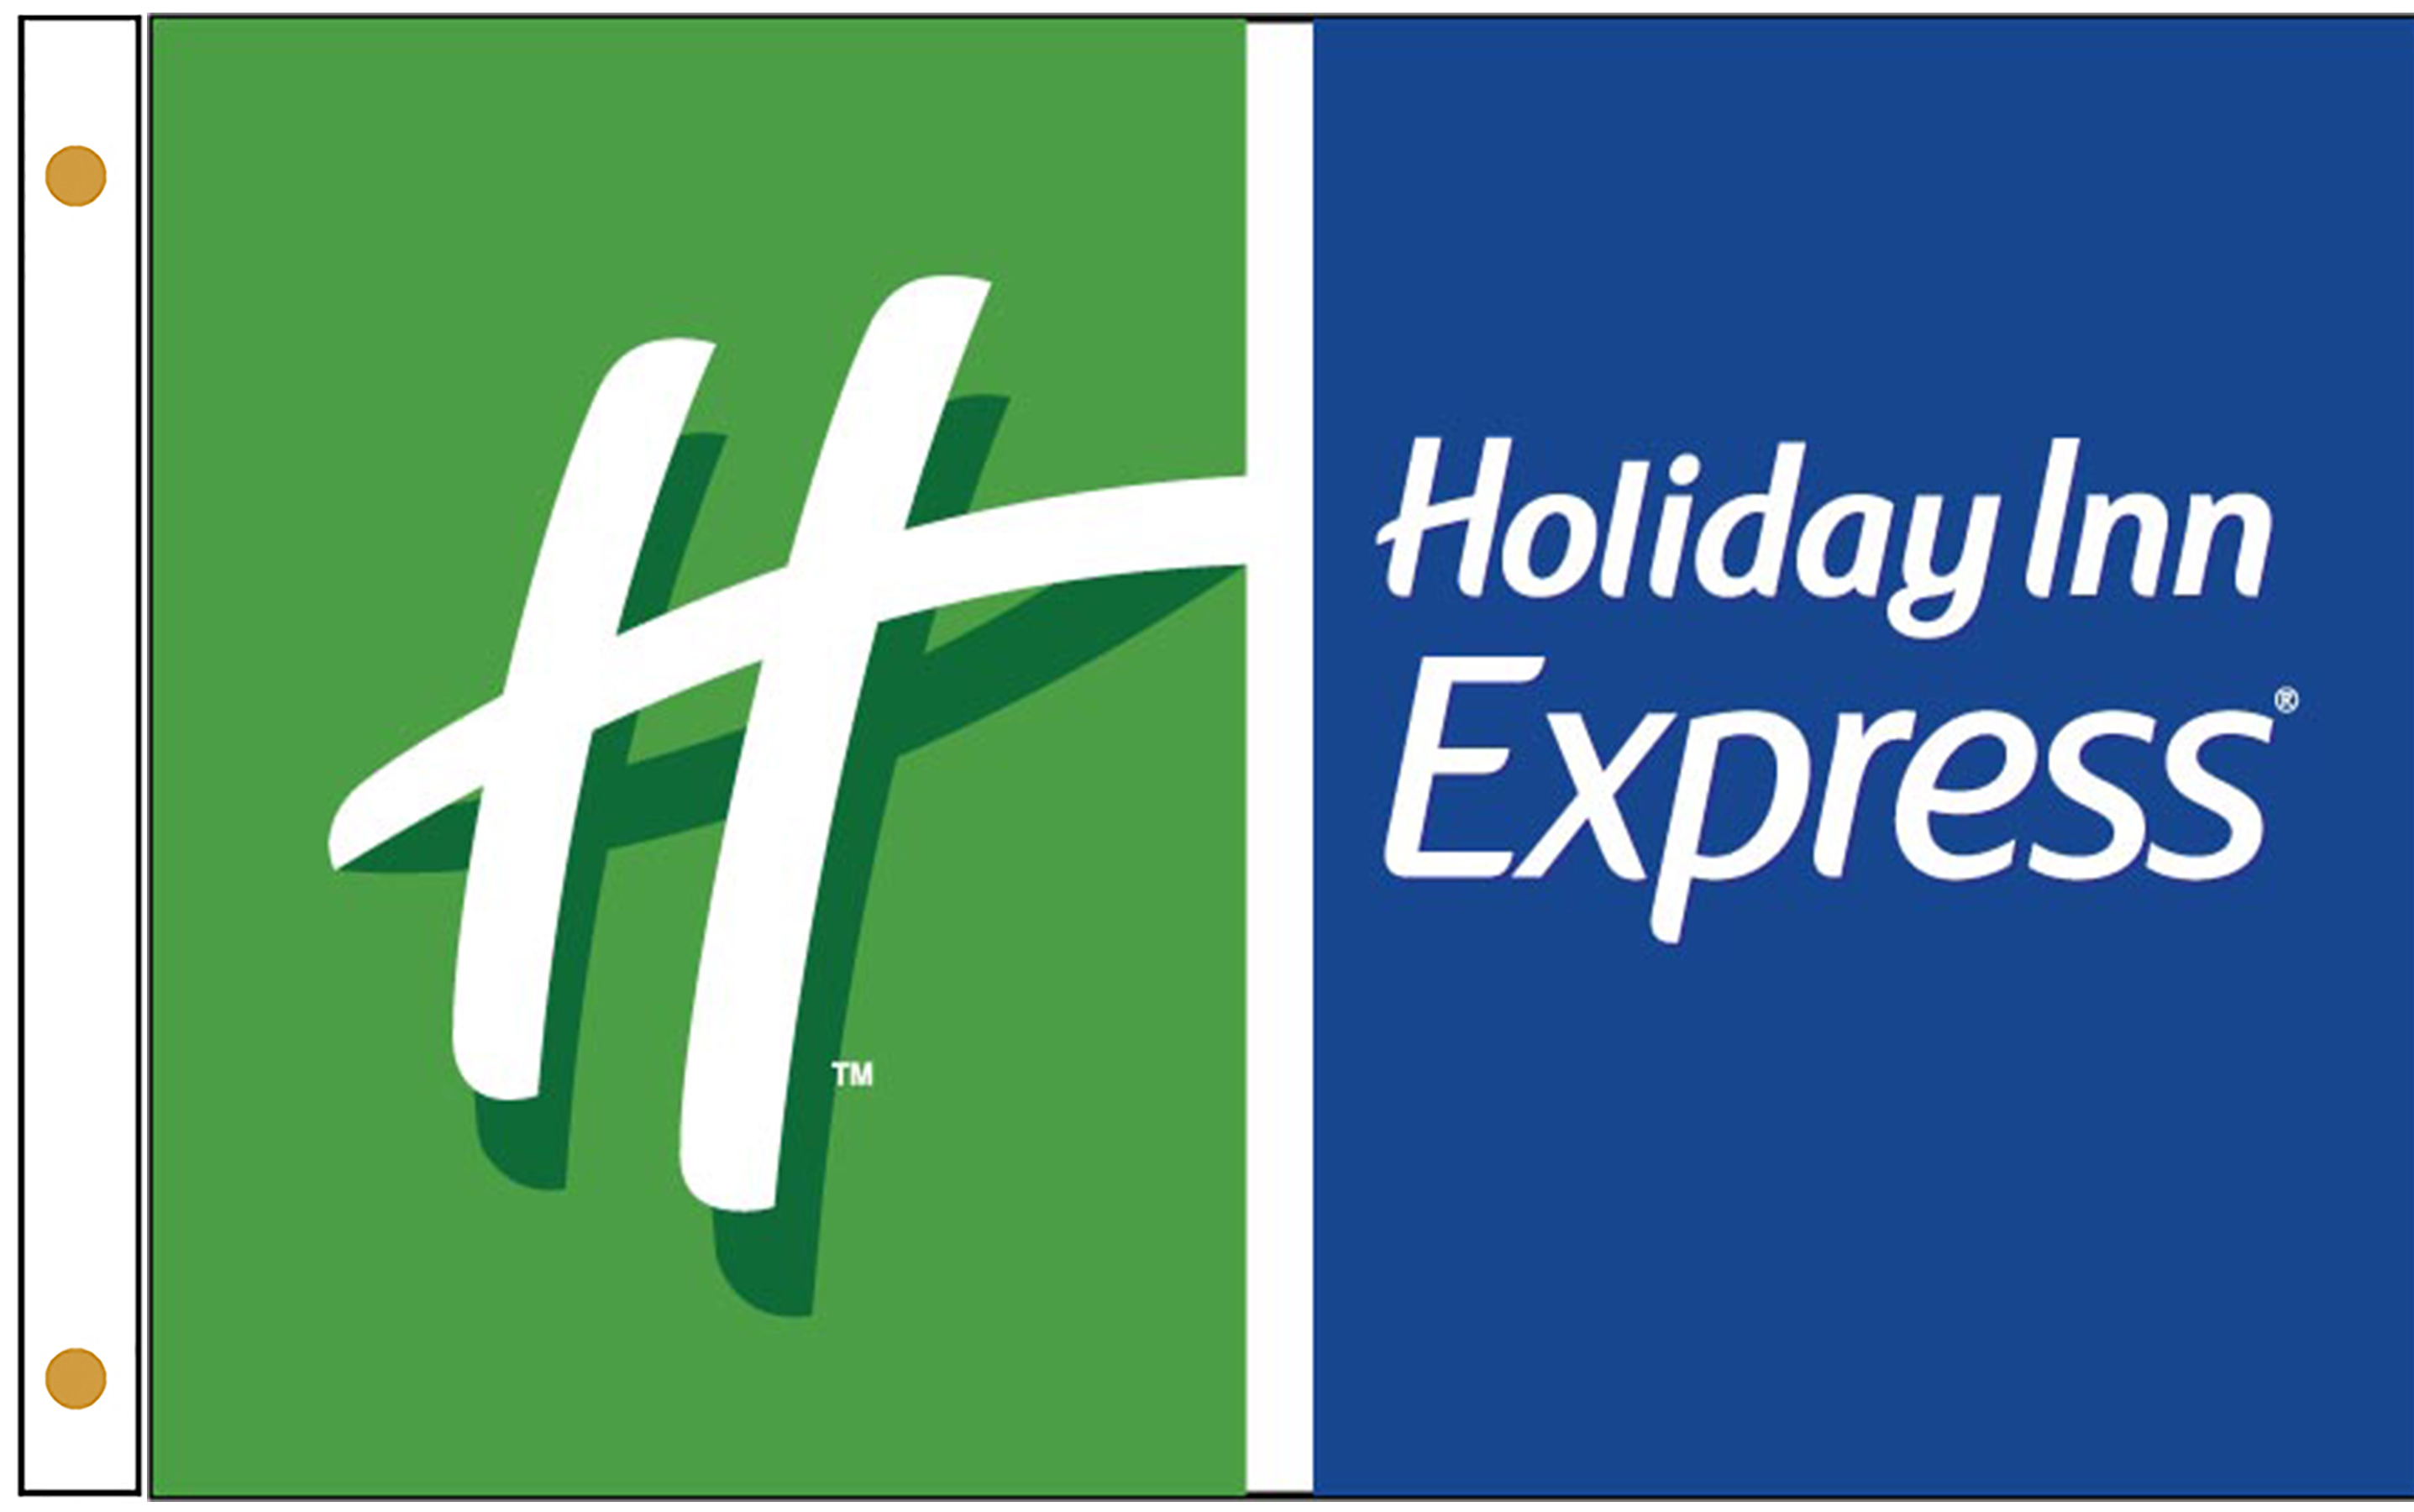 Holiday Inn Express Hotel Flags